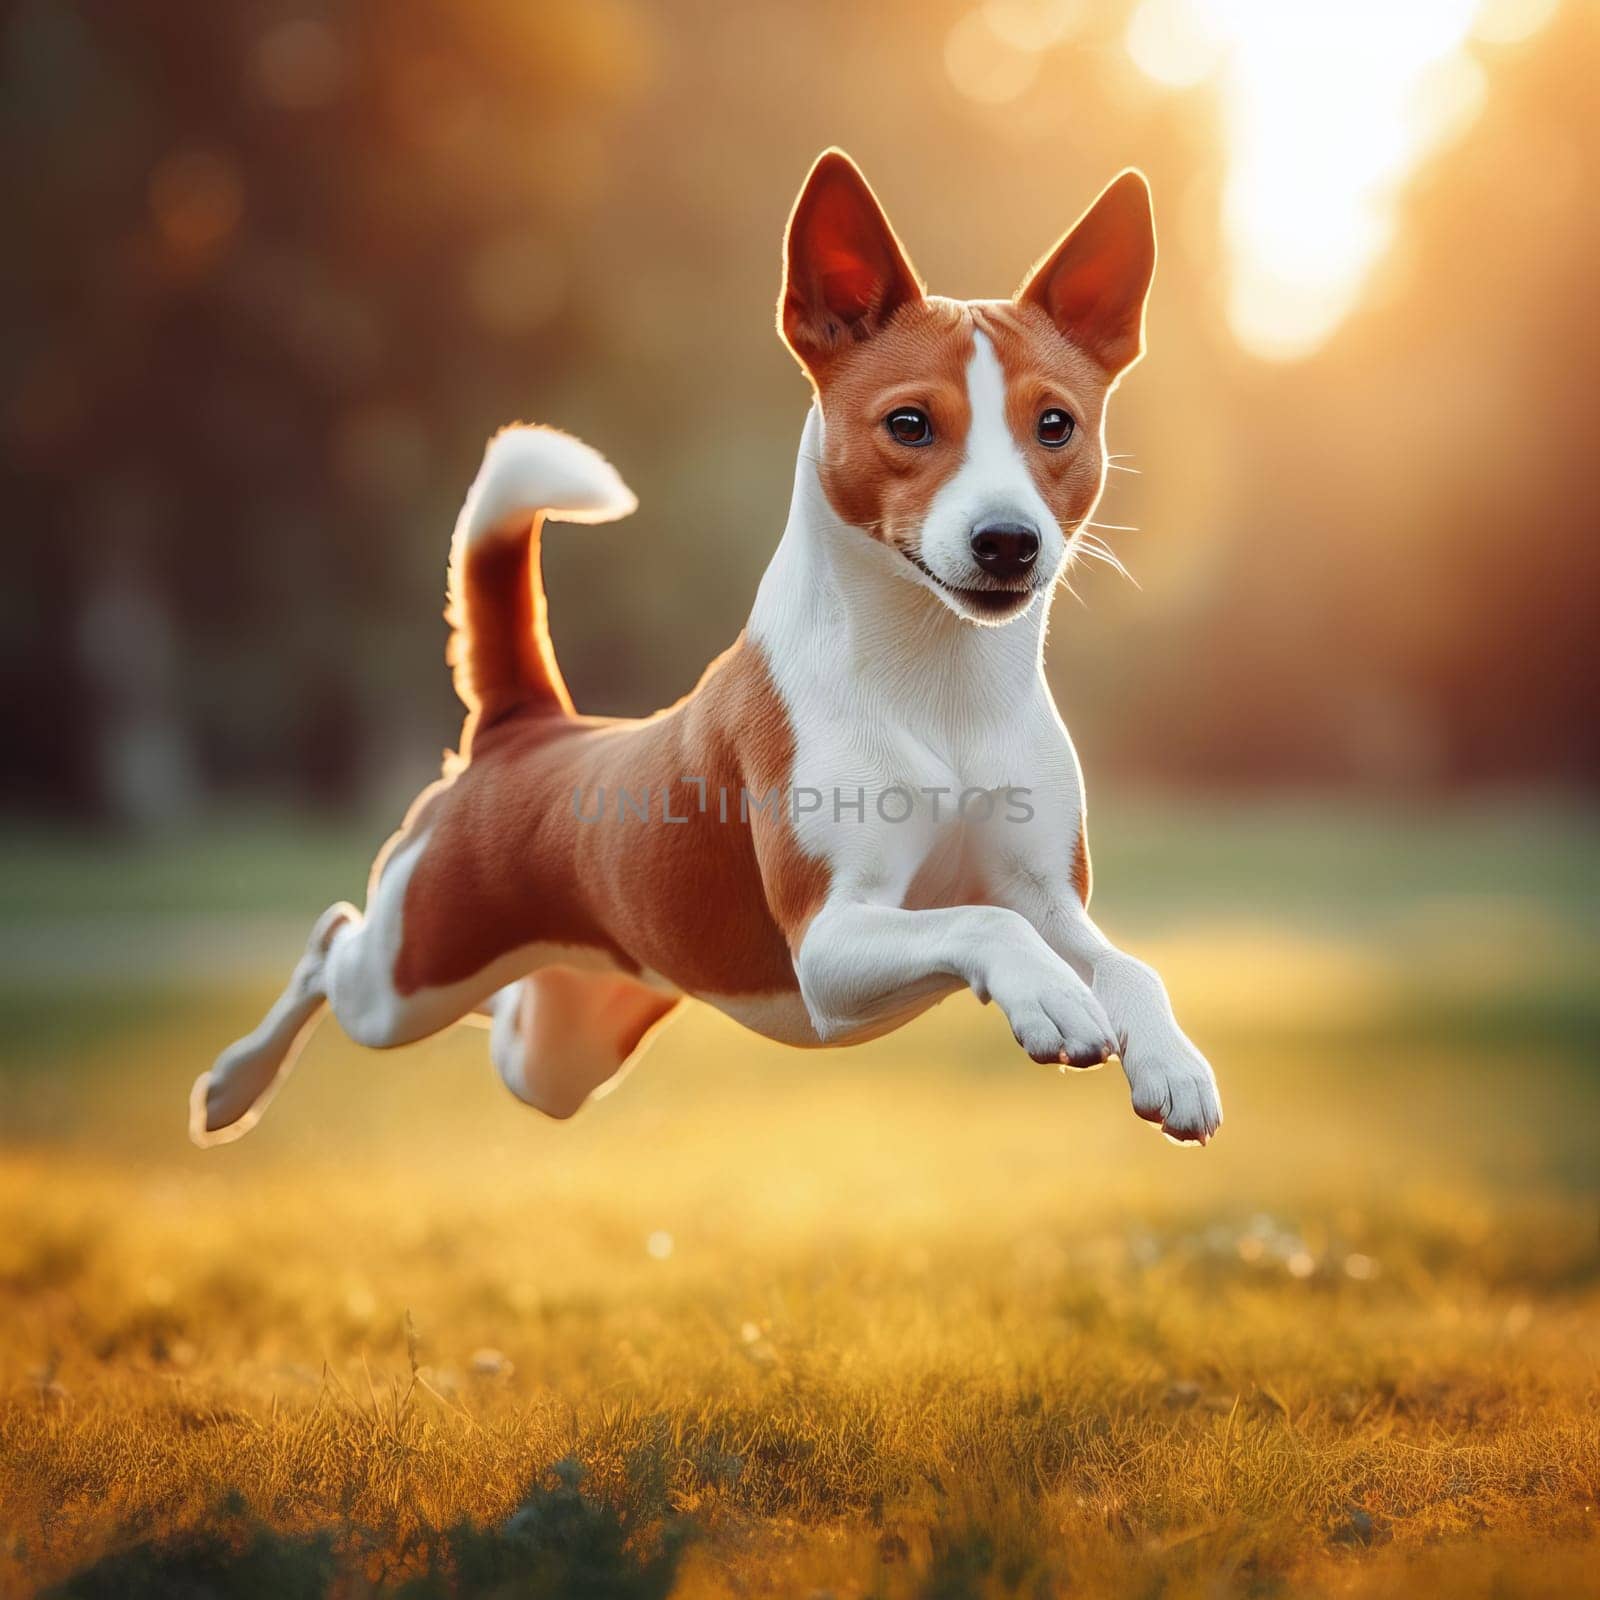 A joyful dog leaps in the air against a sunset backdrop in a park, embodying the spirit of freedom and playfulness